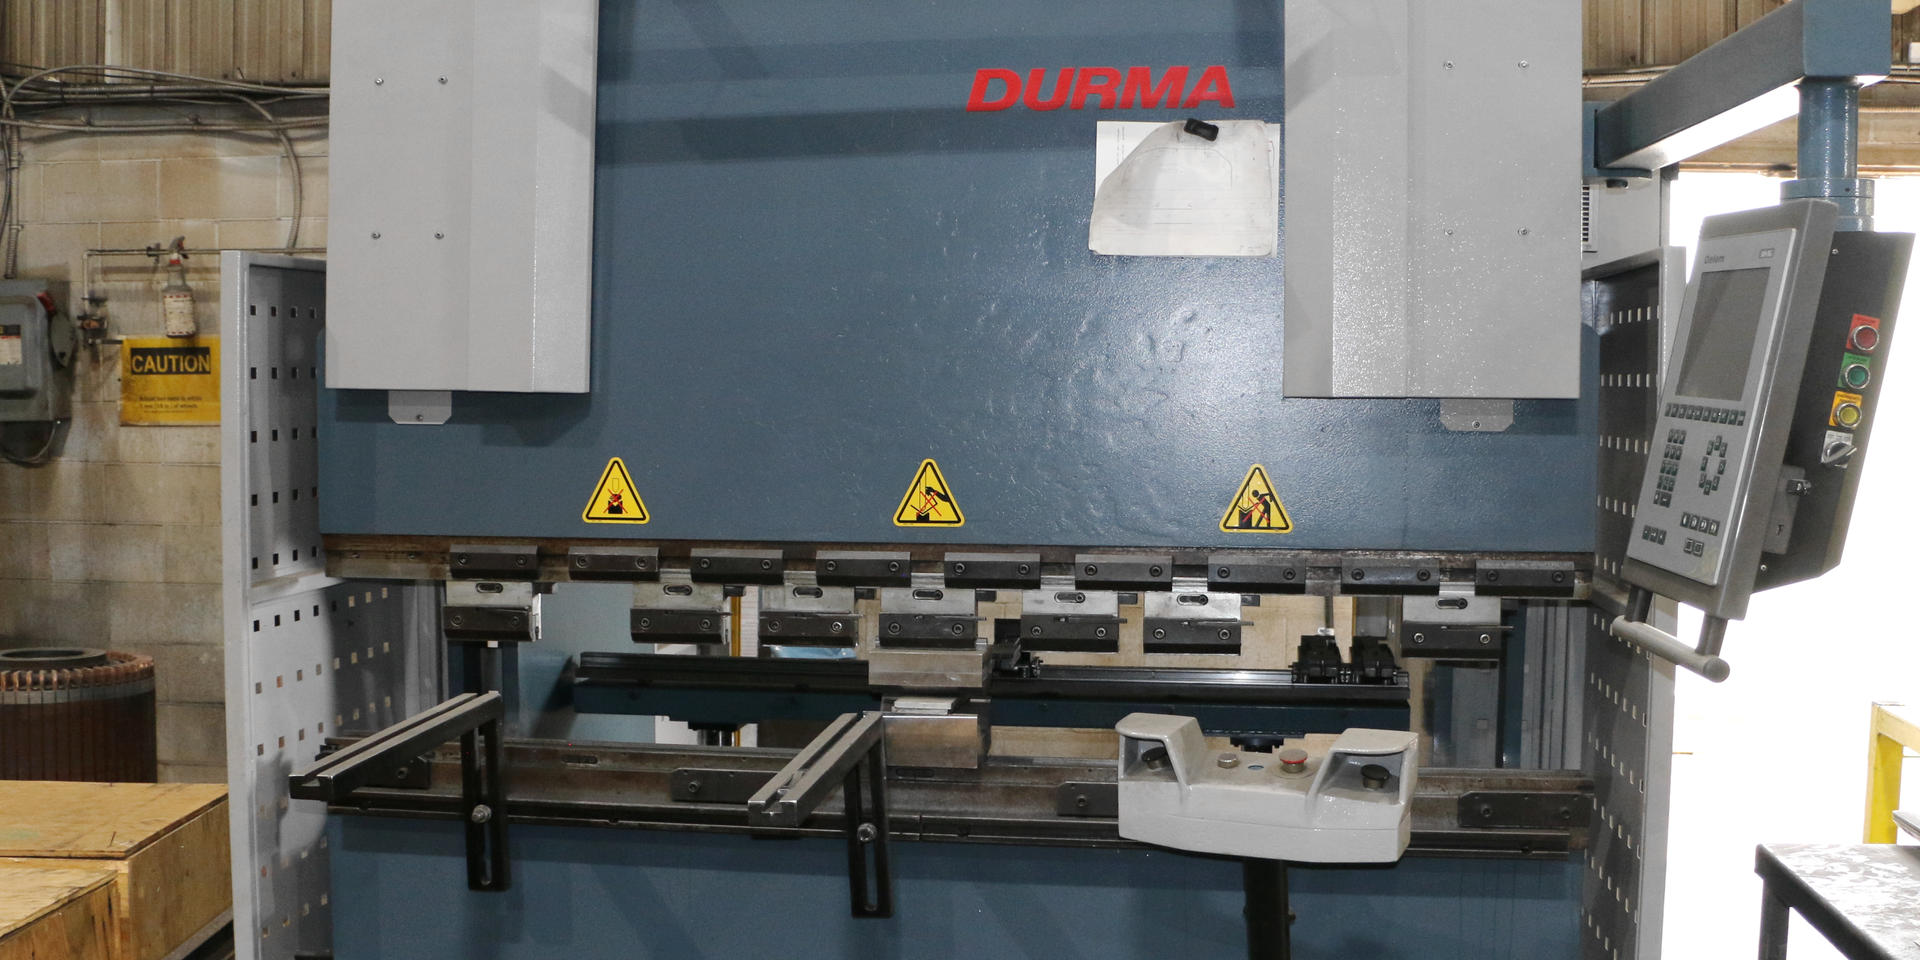 CNC brake for fabrication of smaller components. Durma Press at ADJ Industries facility.